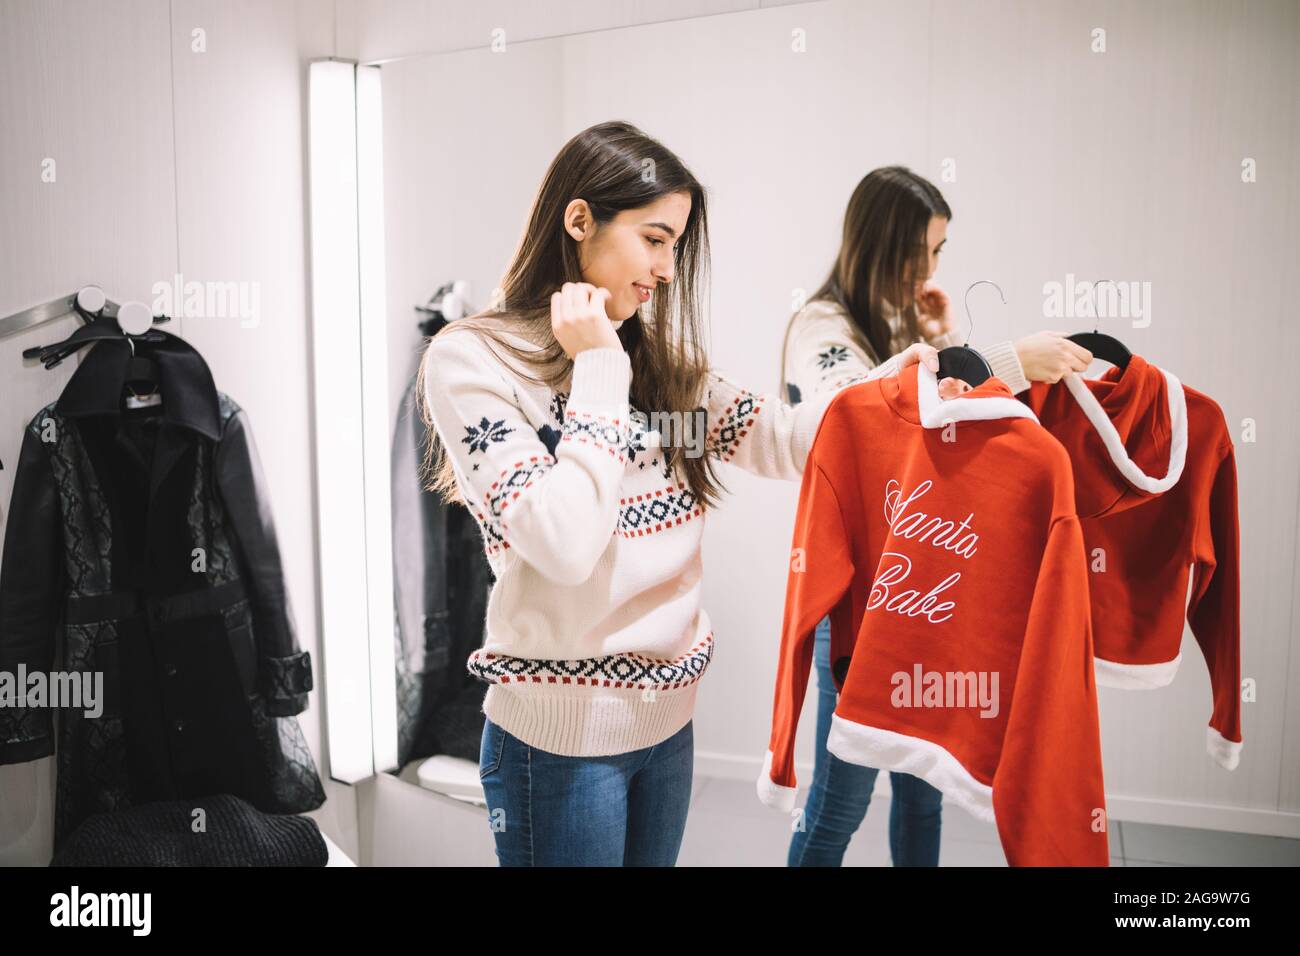 Slim girl looking new red sweater on hanger. Smiling girl holding Santa baby sweater on hanger in dressing room with mirror, with copyspace. Image can Stock Photo